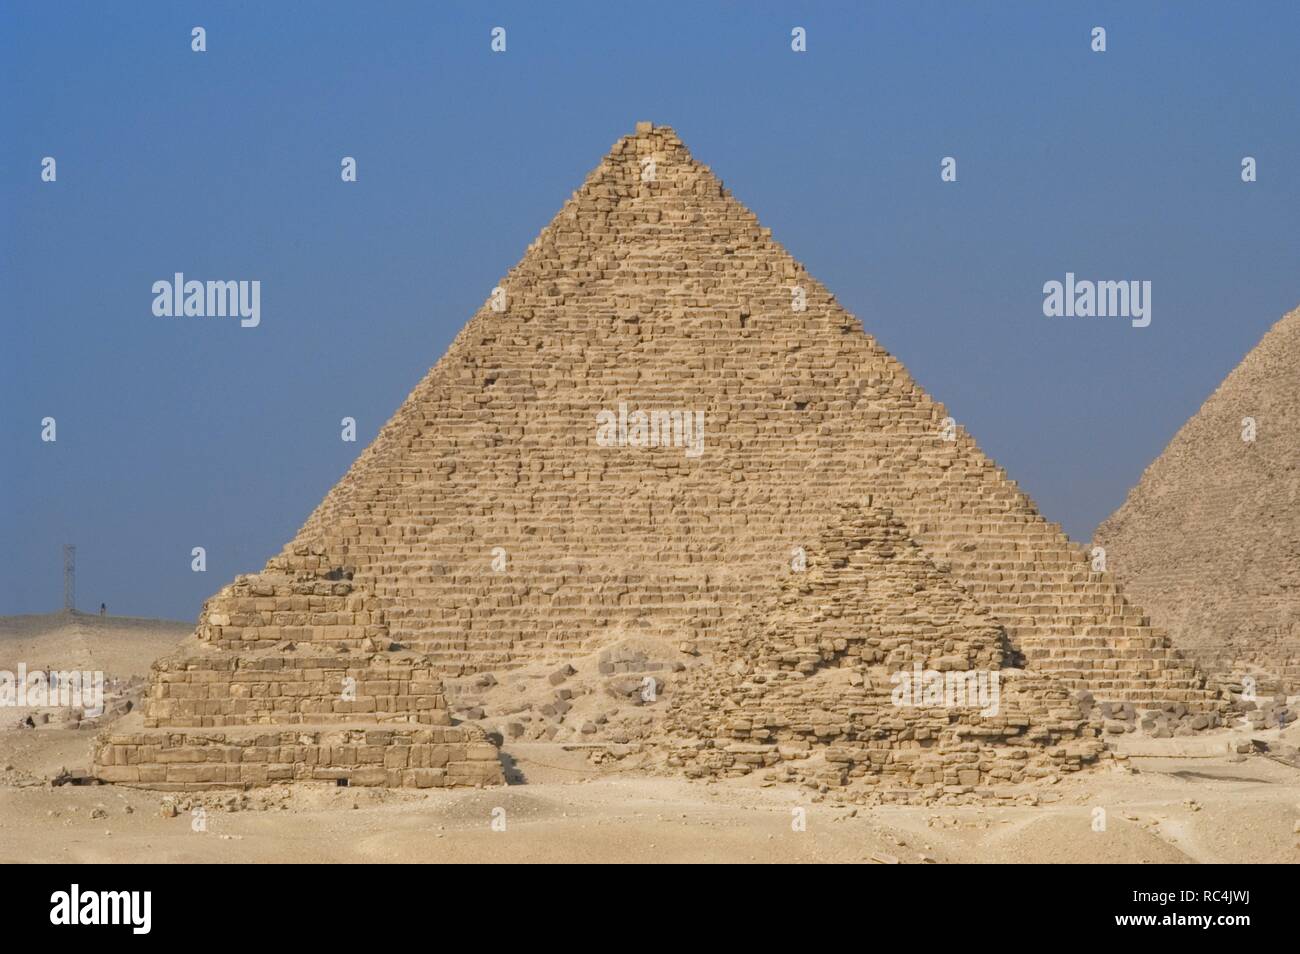 Egypt. The Great Pyramid of Giza called Pyramid of Menkaure. The ...